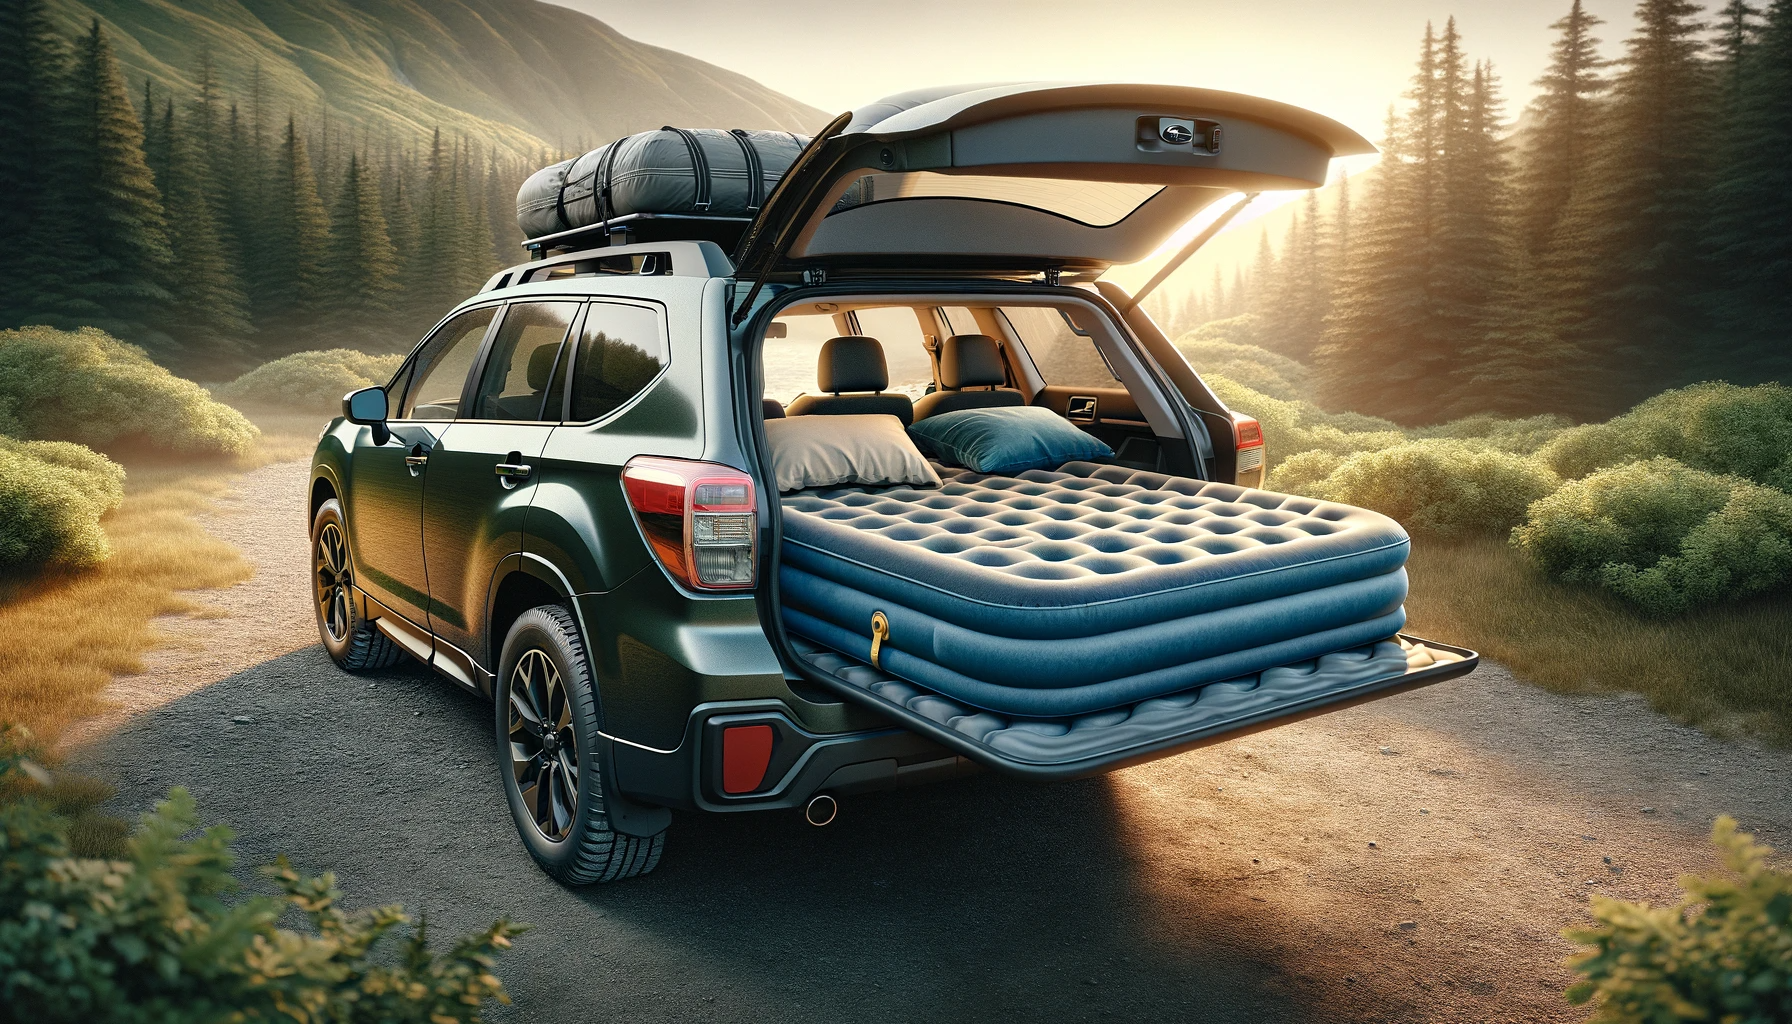 Car Camping in Comfort: How We Turned our Subaru into Our Home On the Road